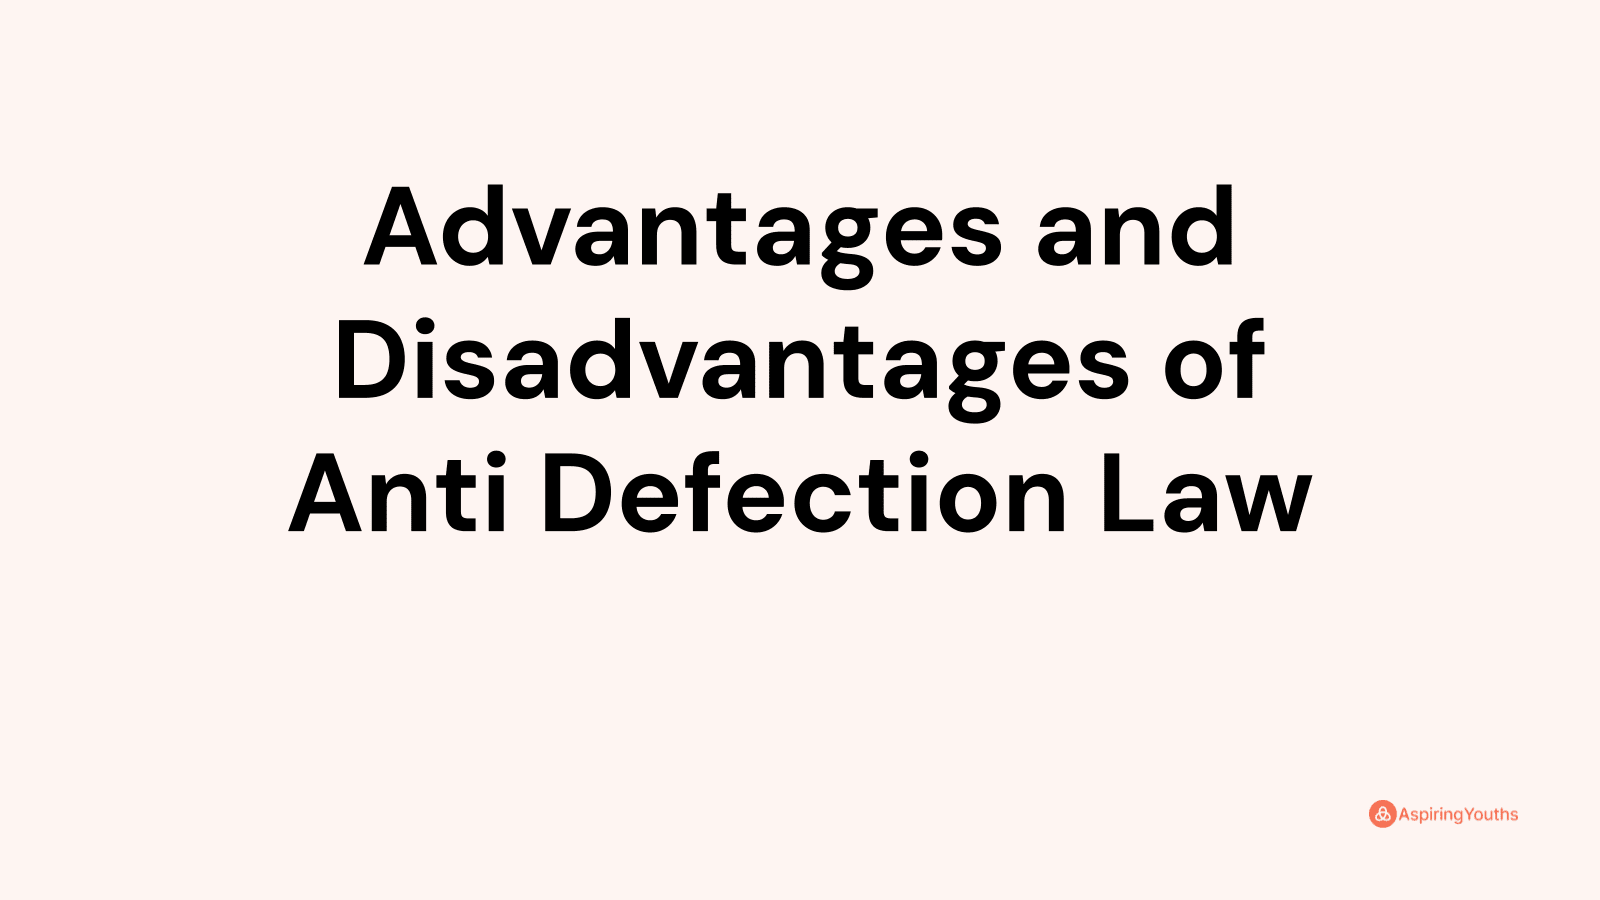 Advantages and disadvantages of Anti Defection Law